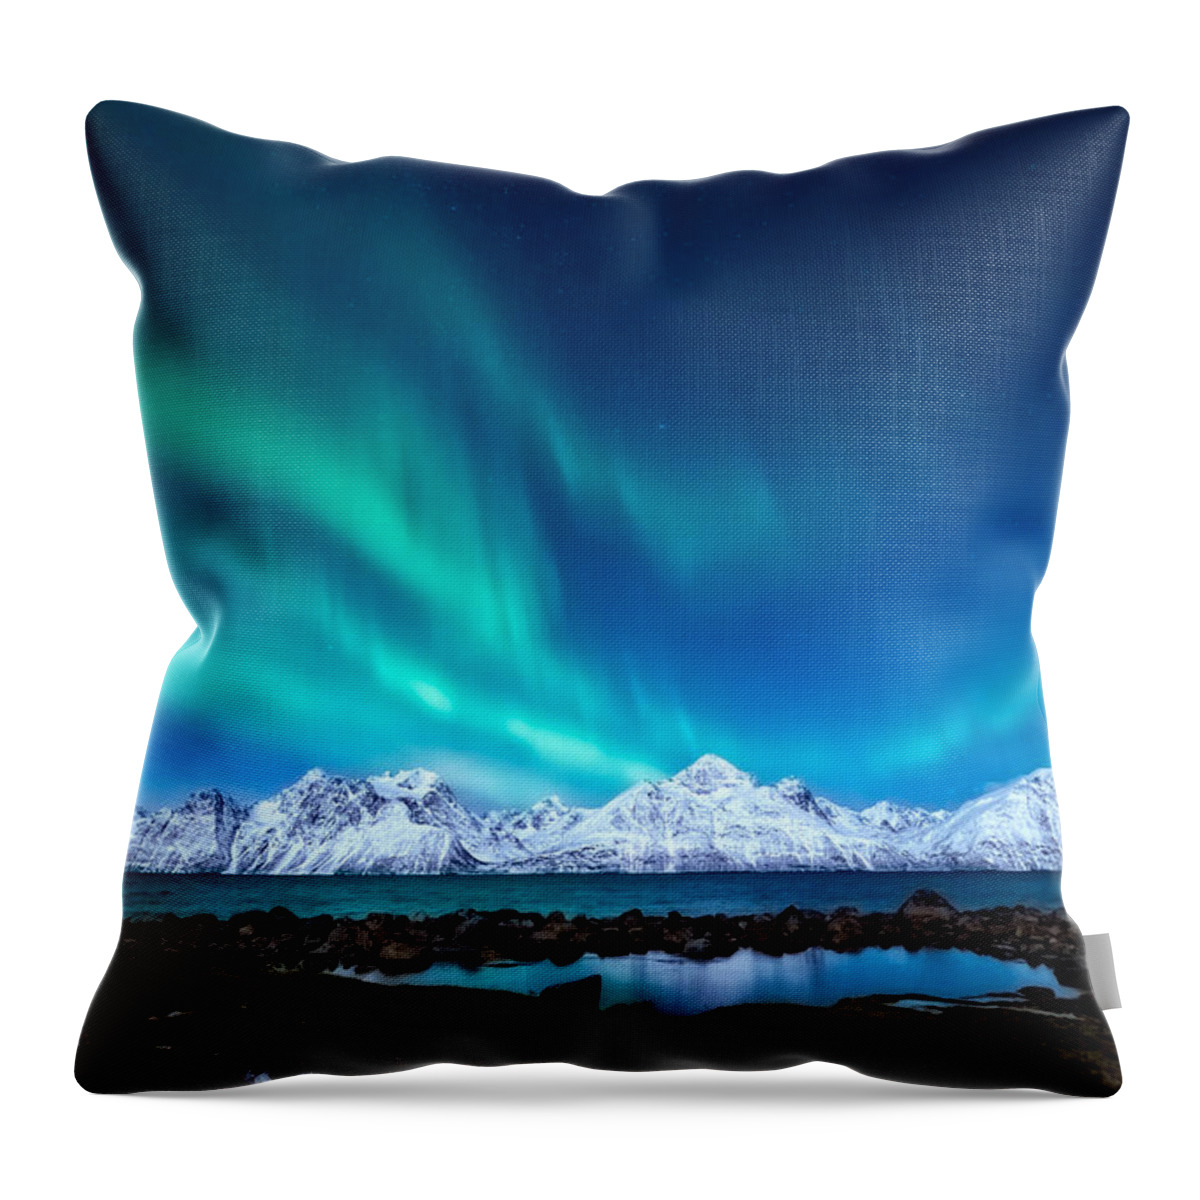 November Throw Pillow featuring the photograph November night by Tor-Ivar Naess